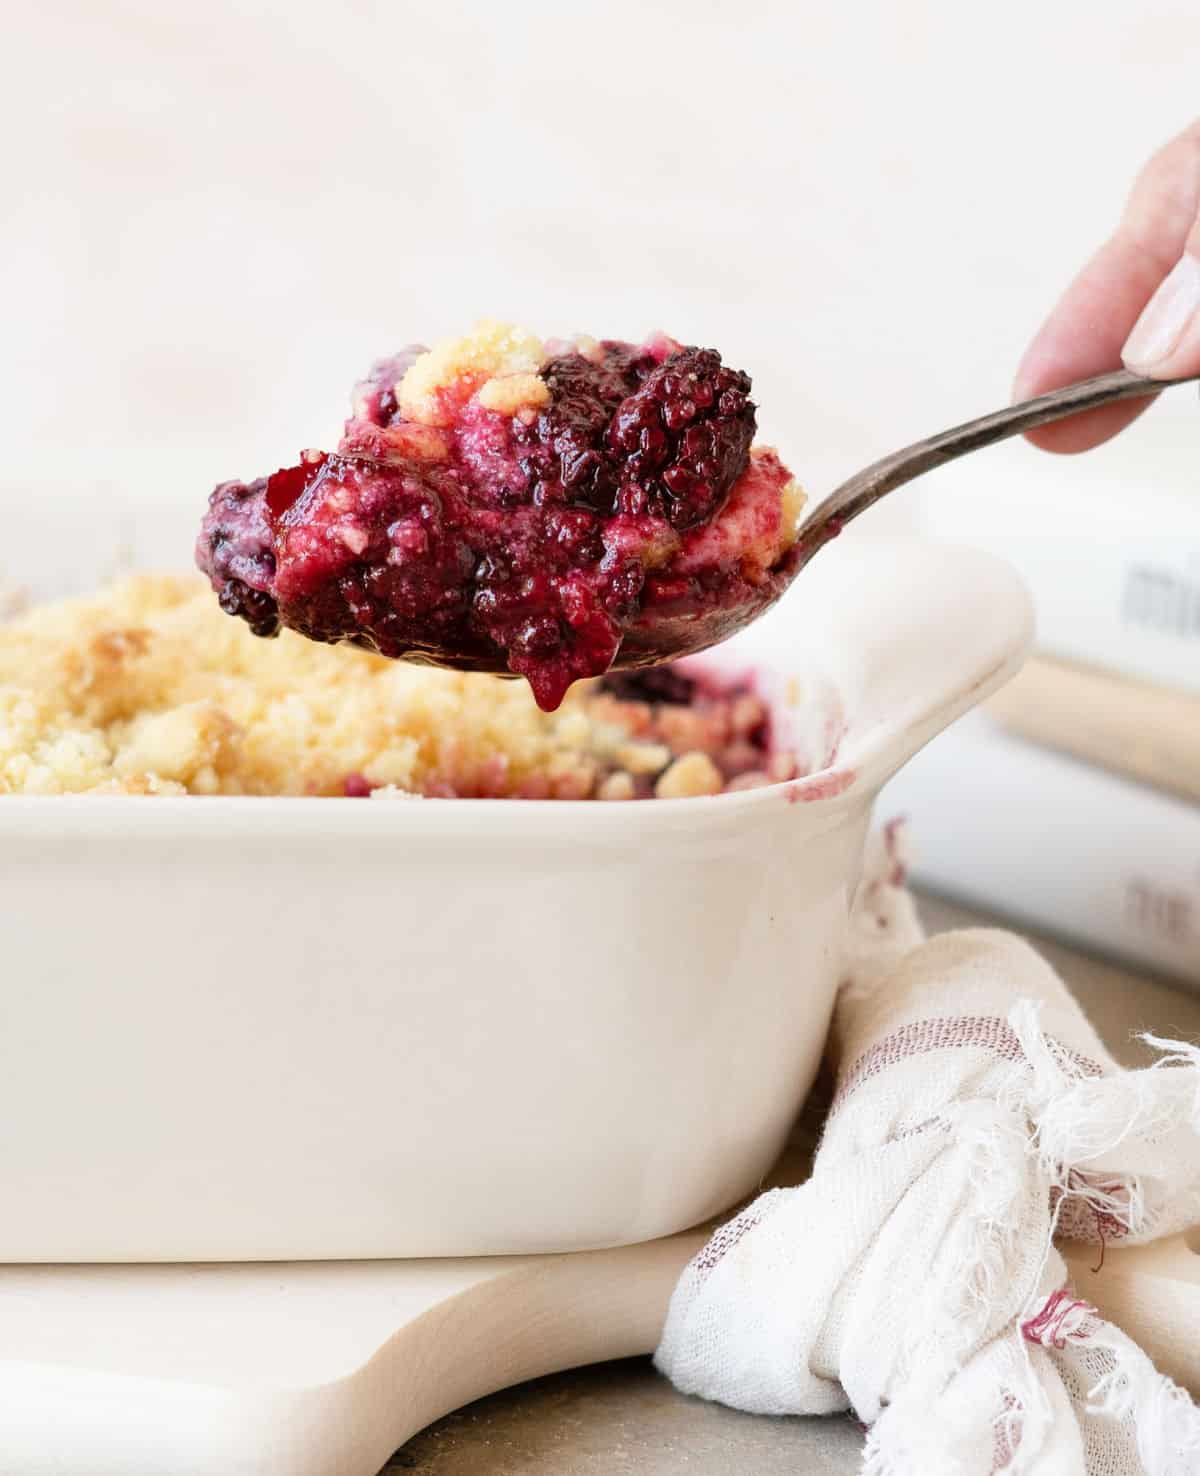 Spoon with blackberry dump cake. White baking dish with kitchen towel on a light peach colored background.